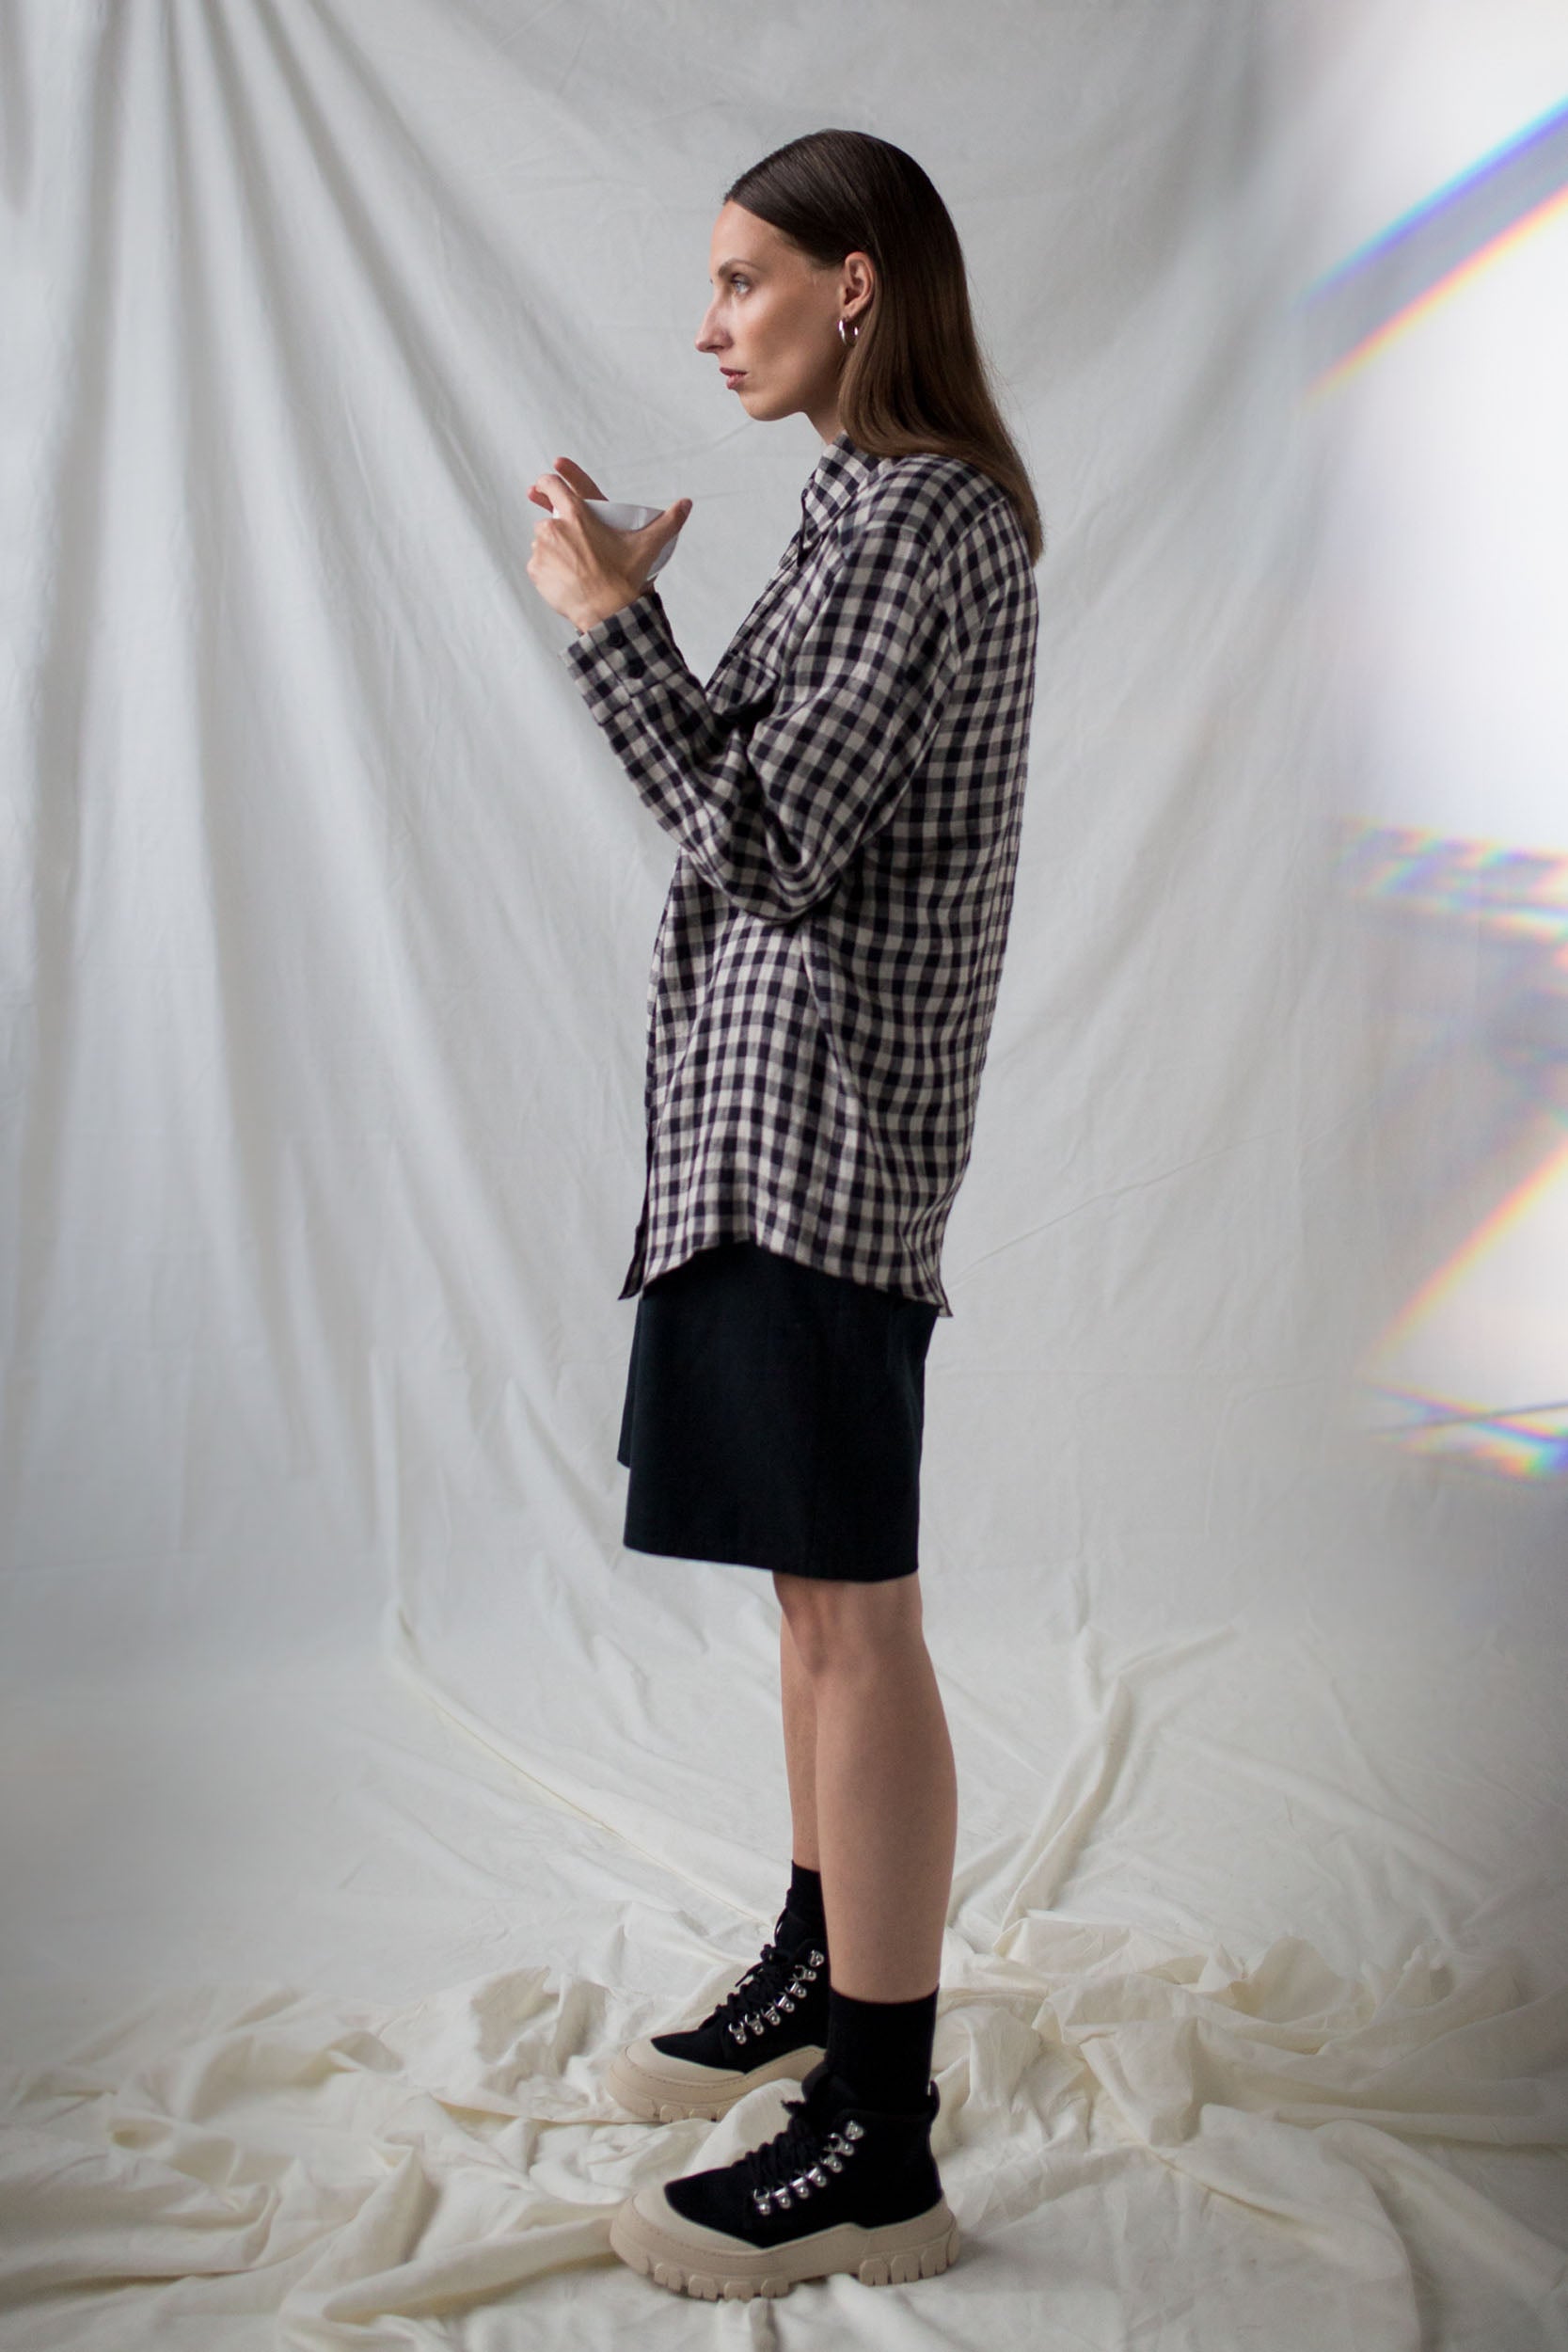 Relaxed fit chekered linen shirt and black workwear shorts